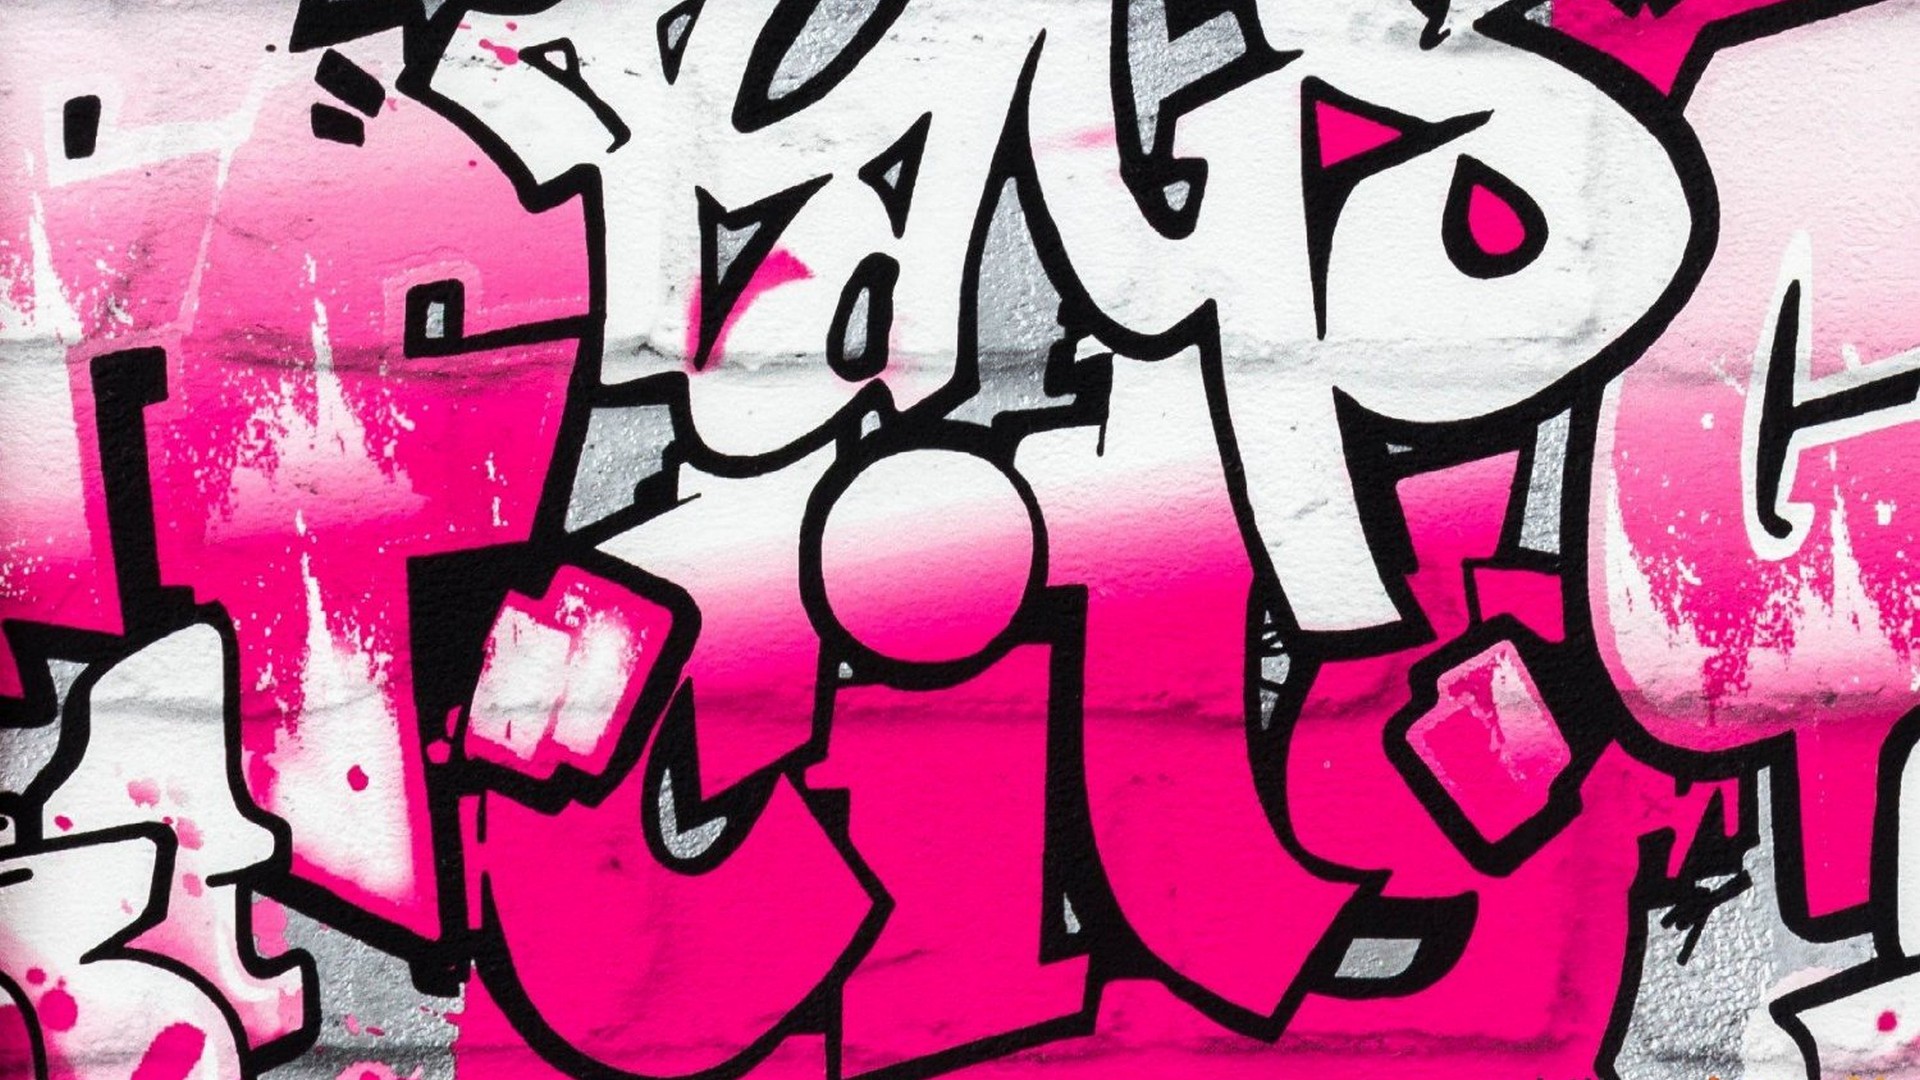 Graffiti Font Wallpaper For Desktop with resolution 1920X1080 pixel. You can use this wallpaper as background for your desktop Computer Screensavers, Android or iPhone smartphones